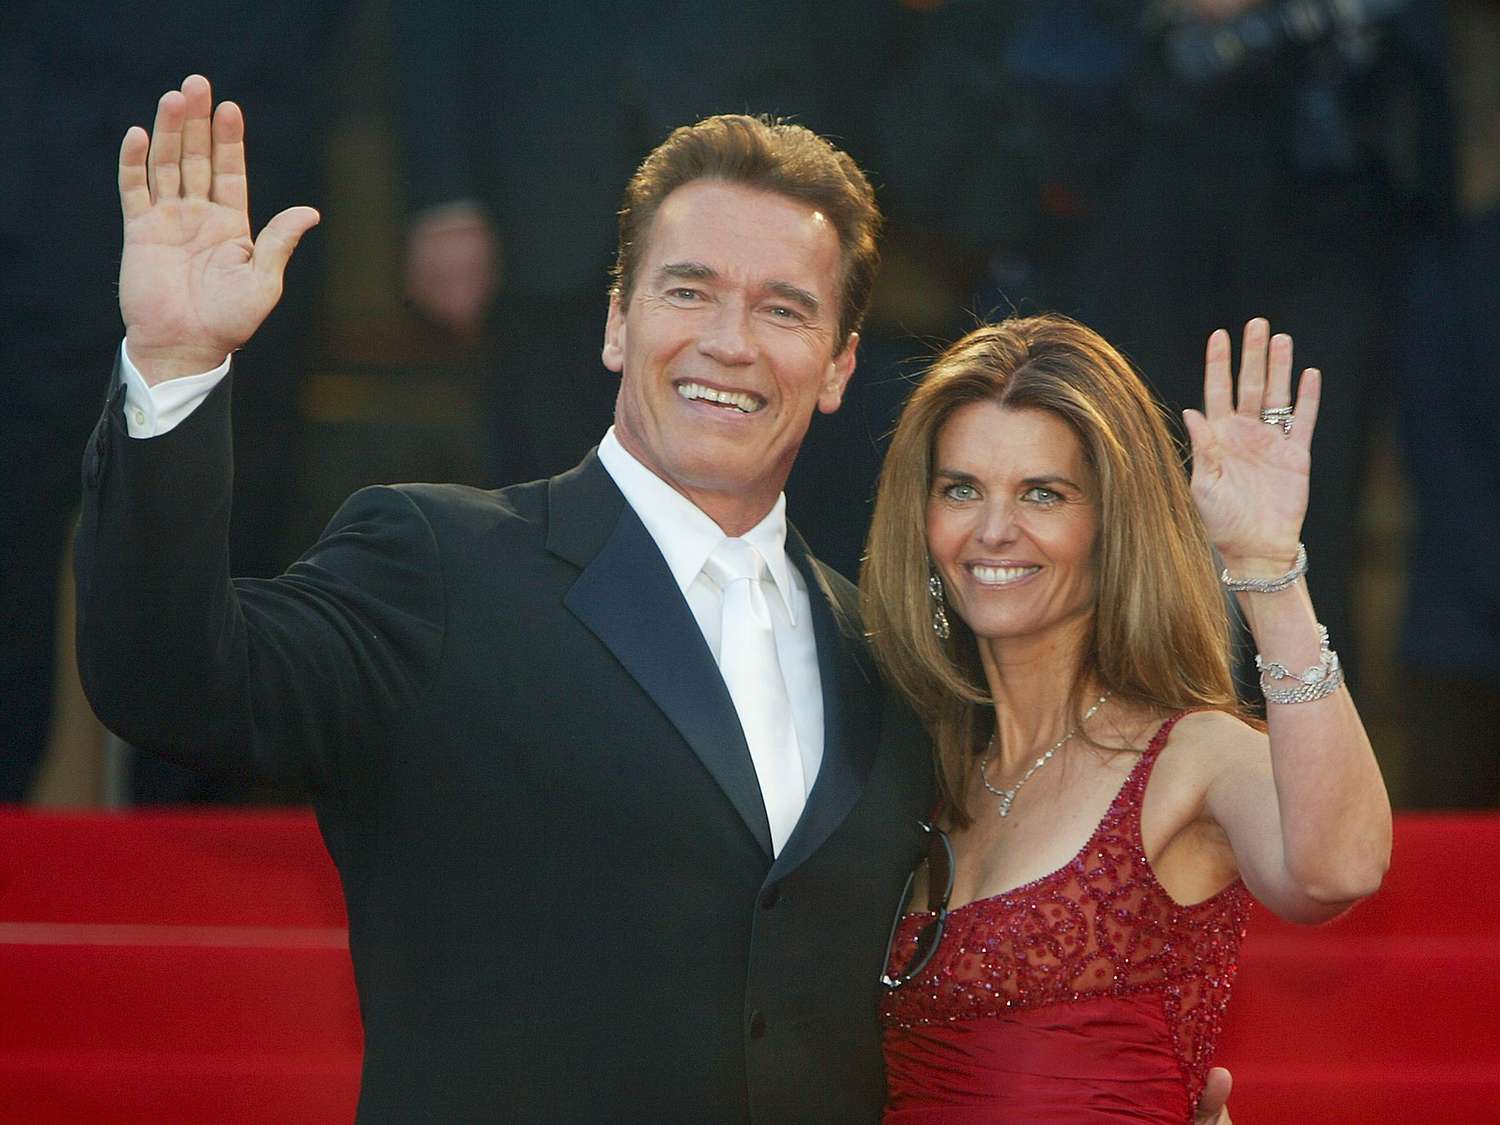 Arnold Schwarzenegger with his wife Maria Shriver wave to fans as the couple arrives for the screening of the film "Les Egares" at the Palais des Festivals during the 56th International Cannes Film Festival on May 16, 2003 in Cannes, France